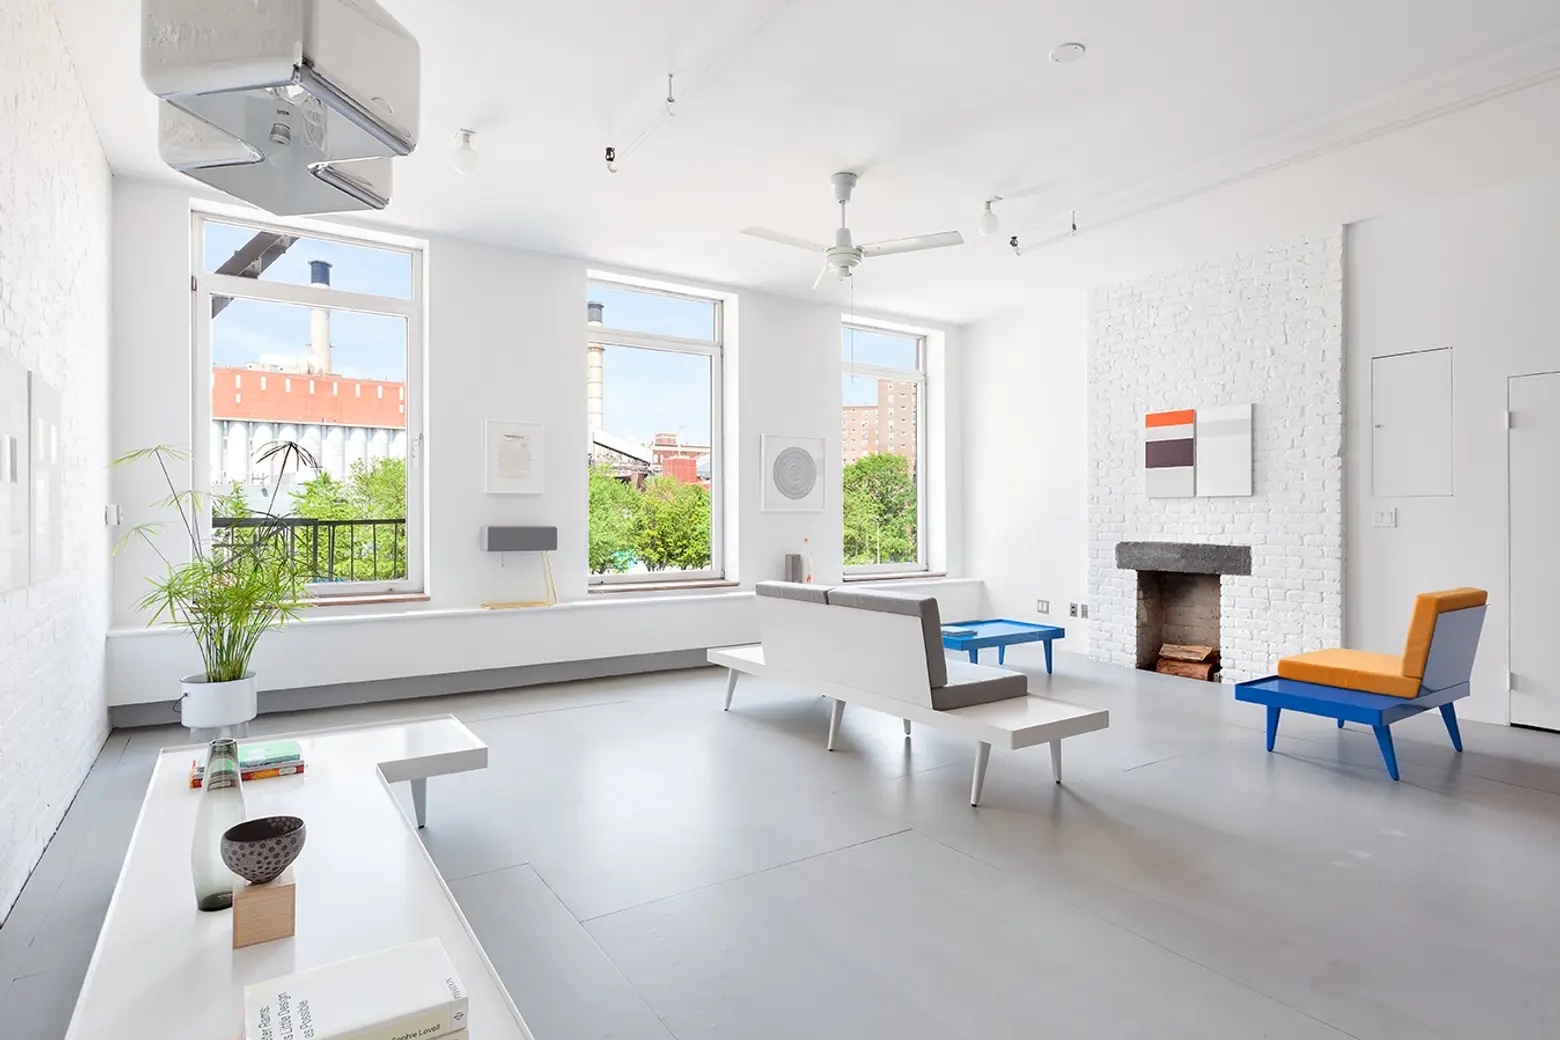 $1.6M Floor-Through Loft Is All About Minimalism in the East Village